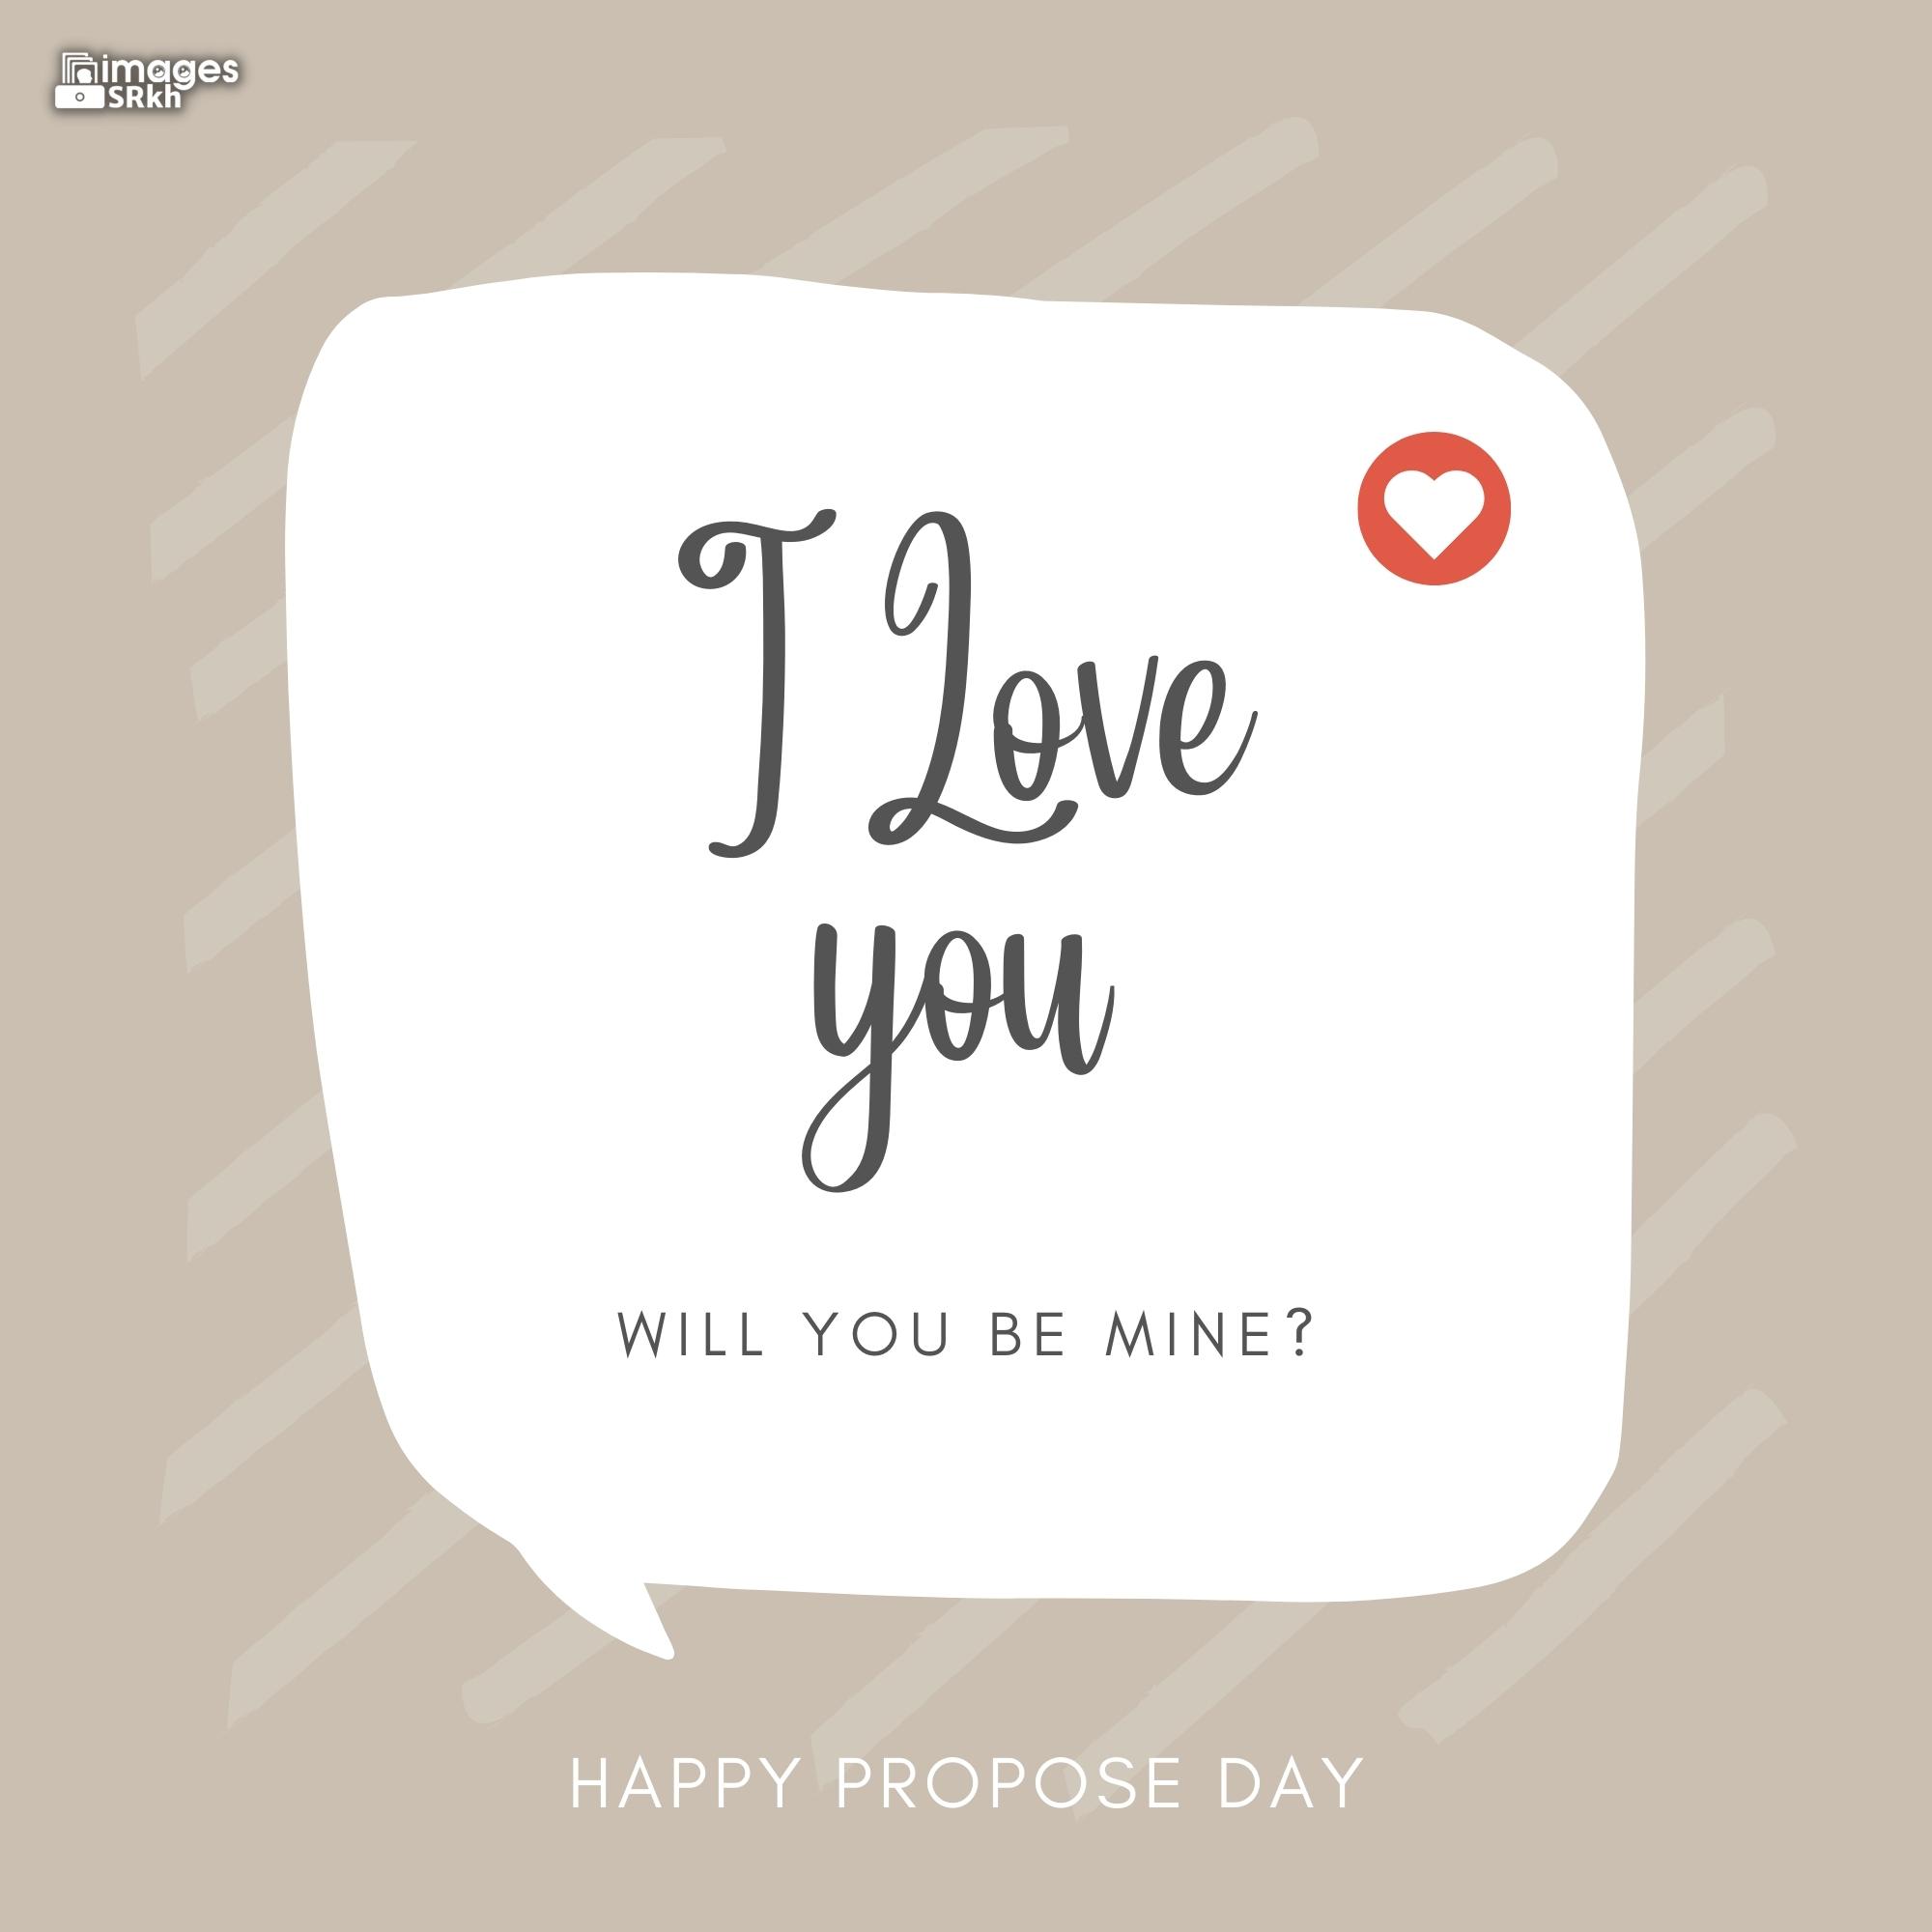 Happy Propose Day Images | 432 | I love you will you be mine